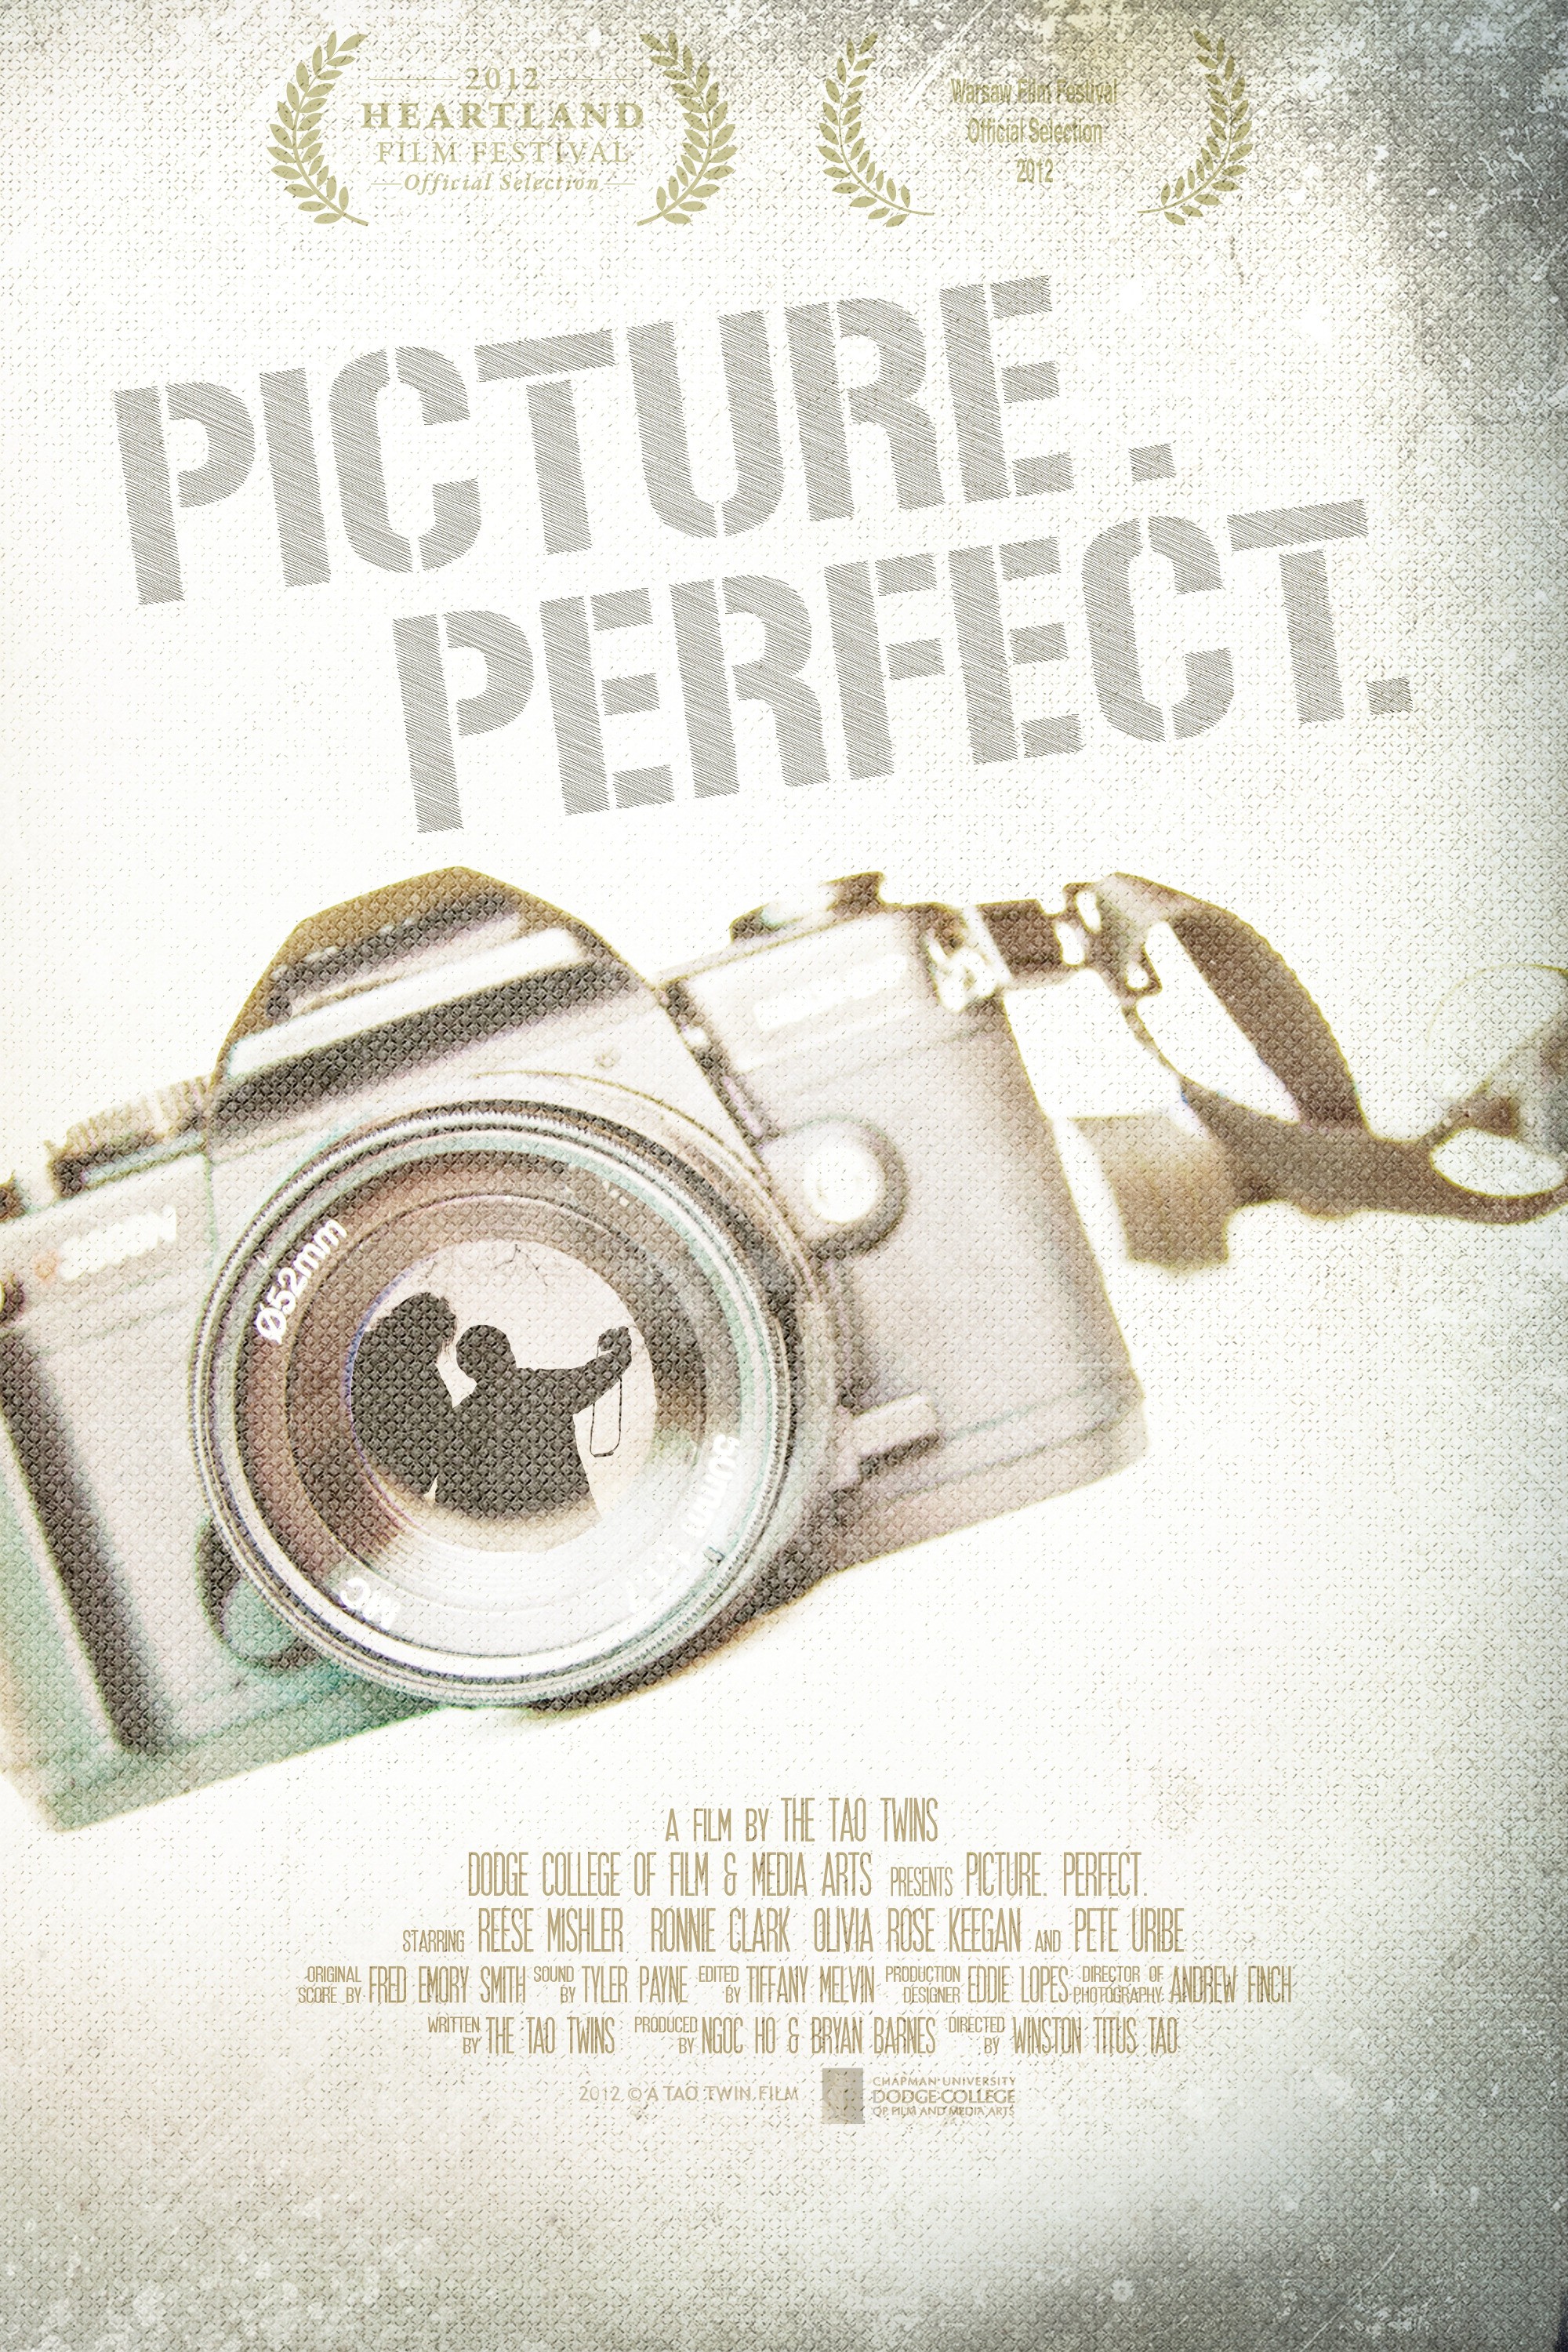 Mega Sized Movie Poster Image for Picture. Perfect.